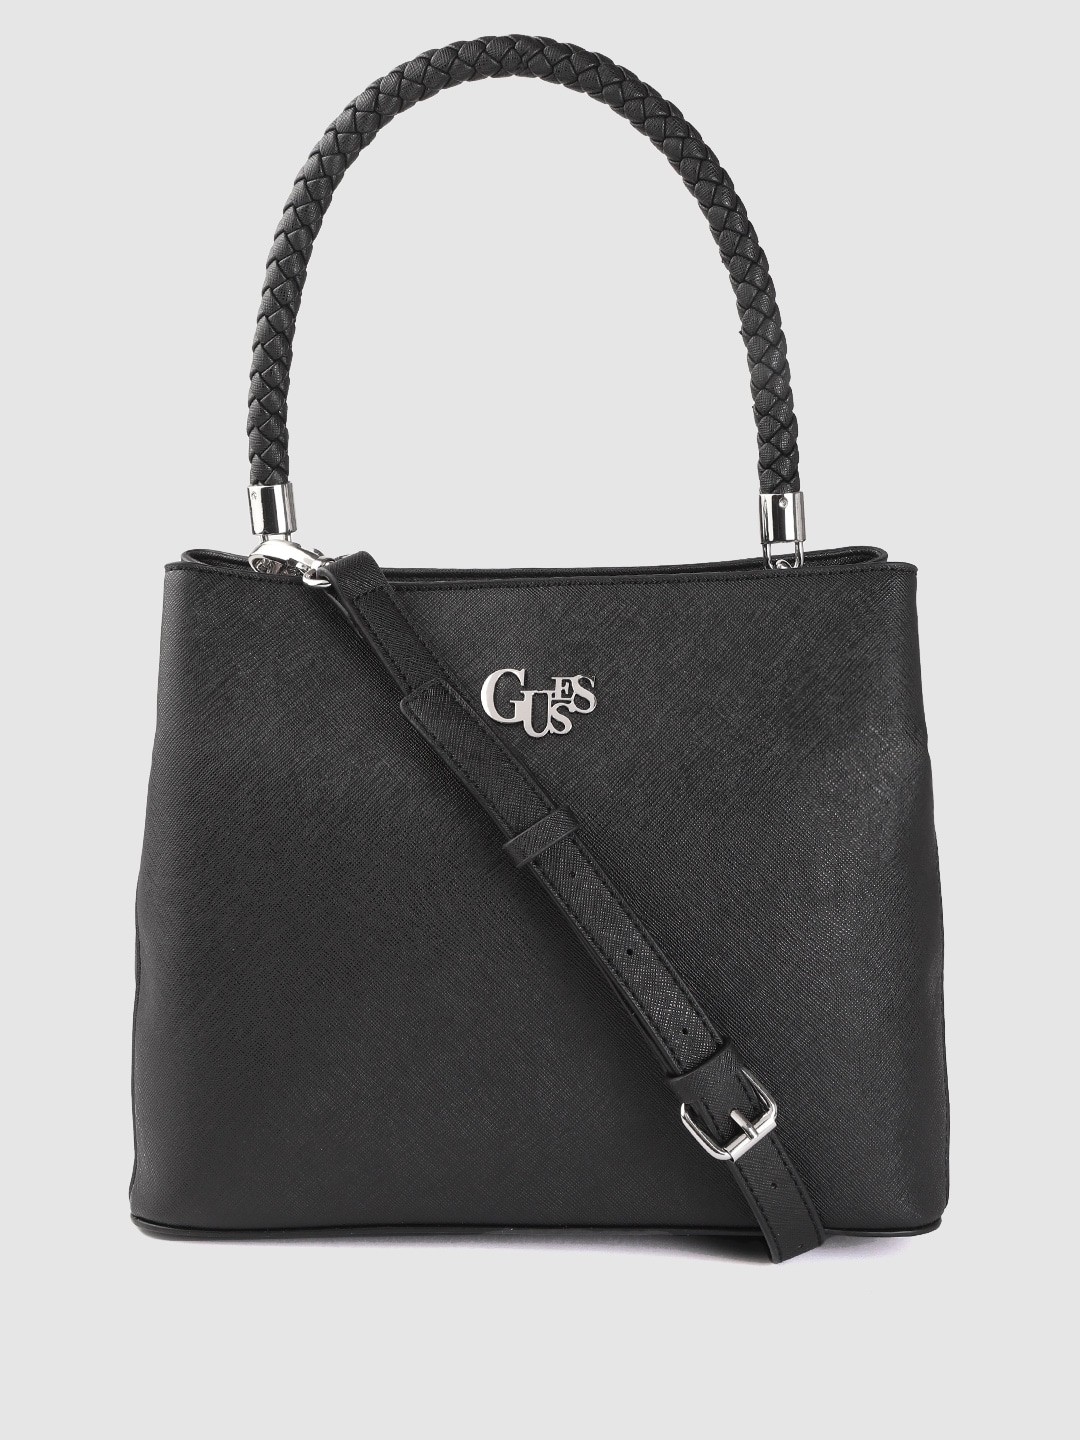 GUESS Black Solid Structured Handheld Bag Price in India